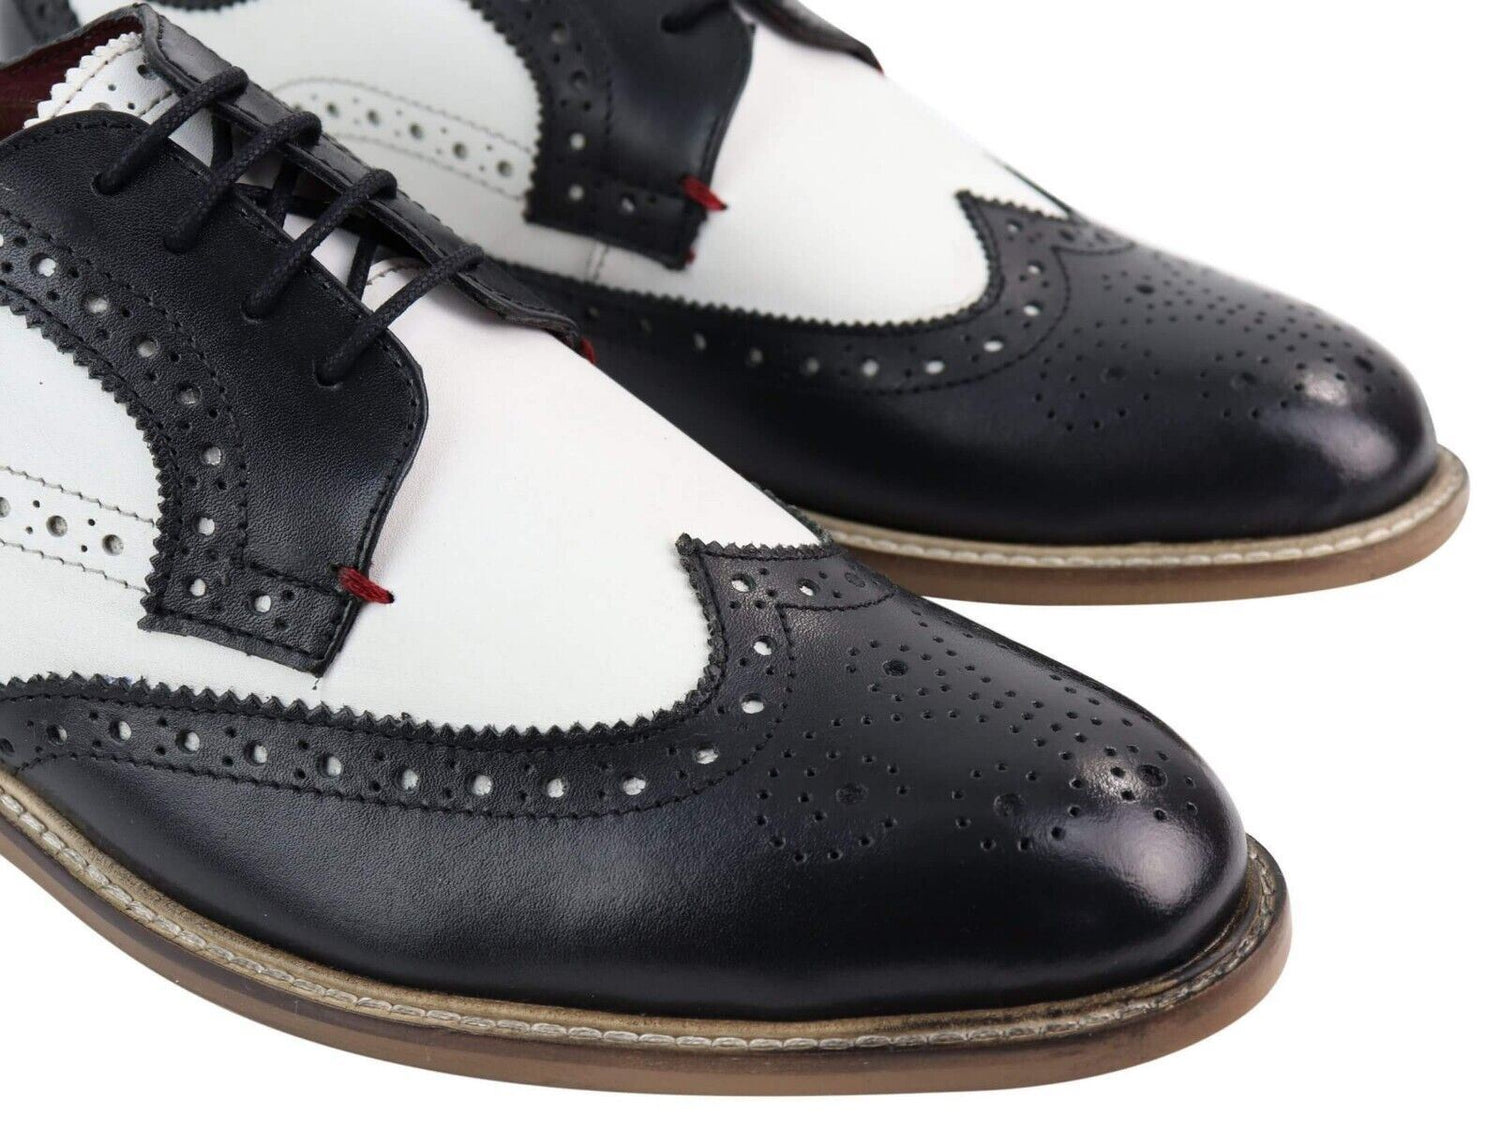 Mens Classic Oxford Brogue Gatsby Shoes in Black/White Leather - Upperclass Fashions 